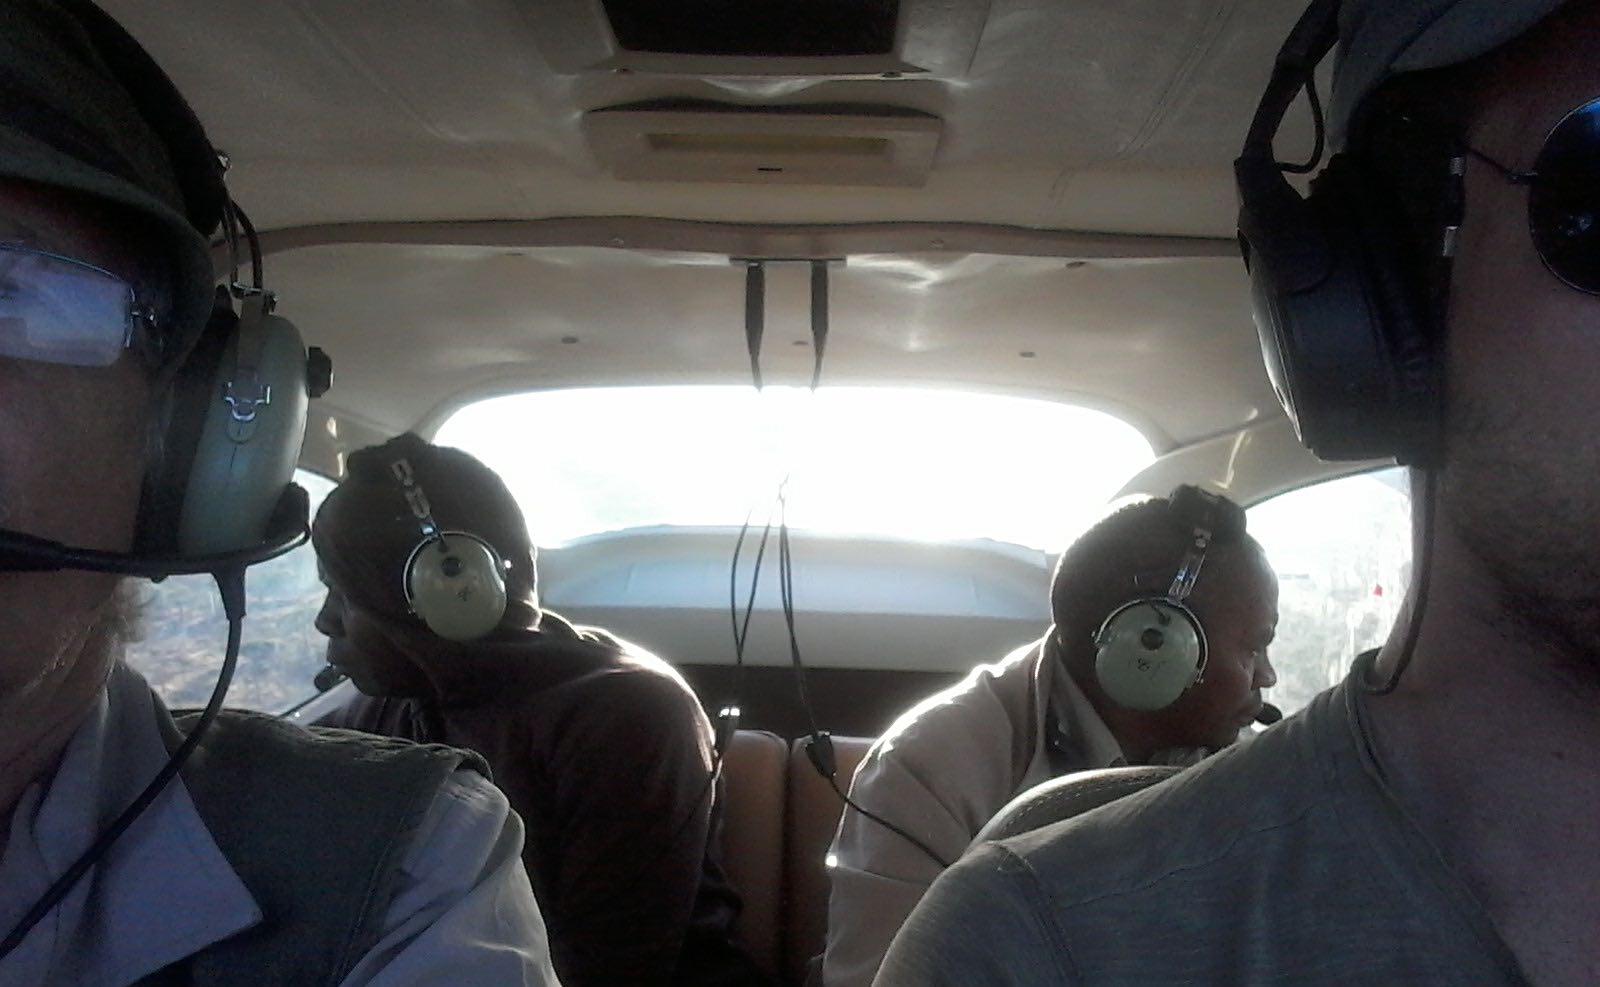 The inside of the four-seat Cessna aircraft, showing the four people involved in the survey.